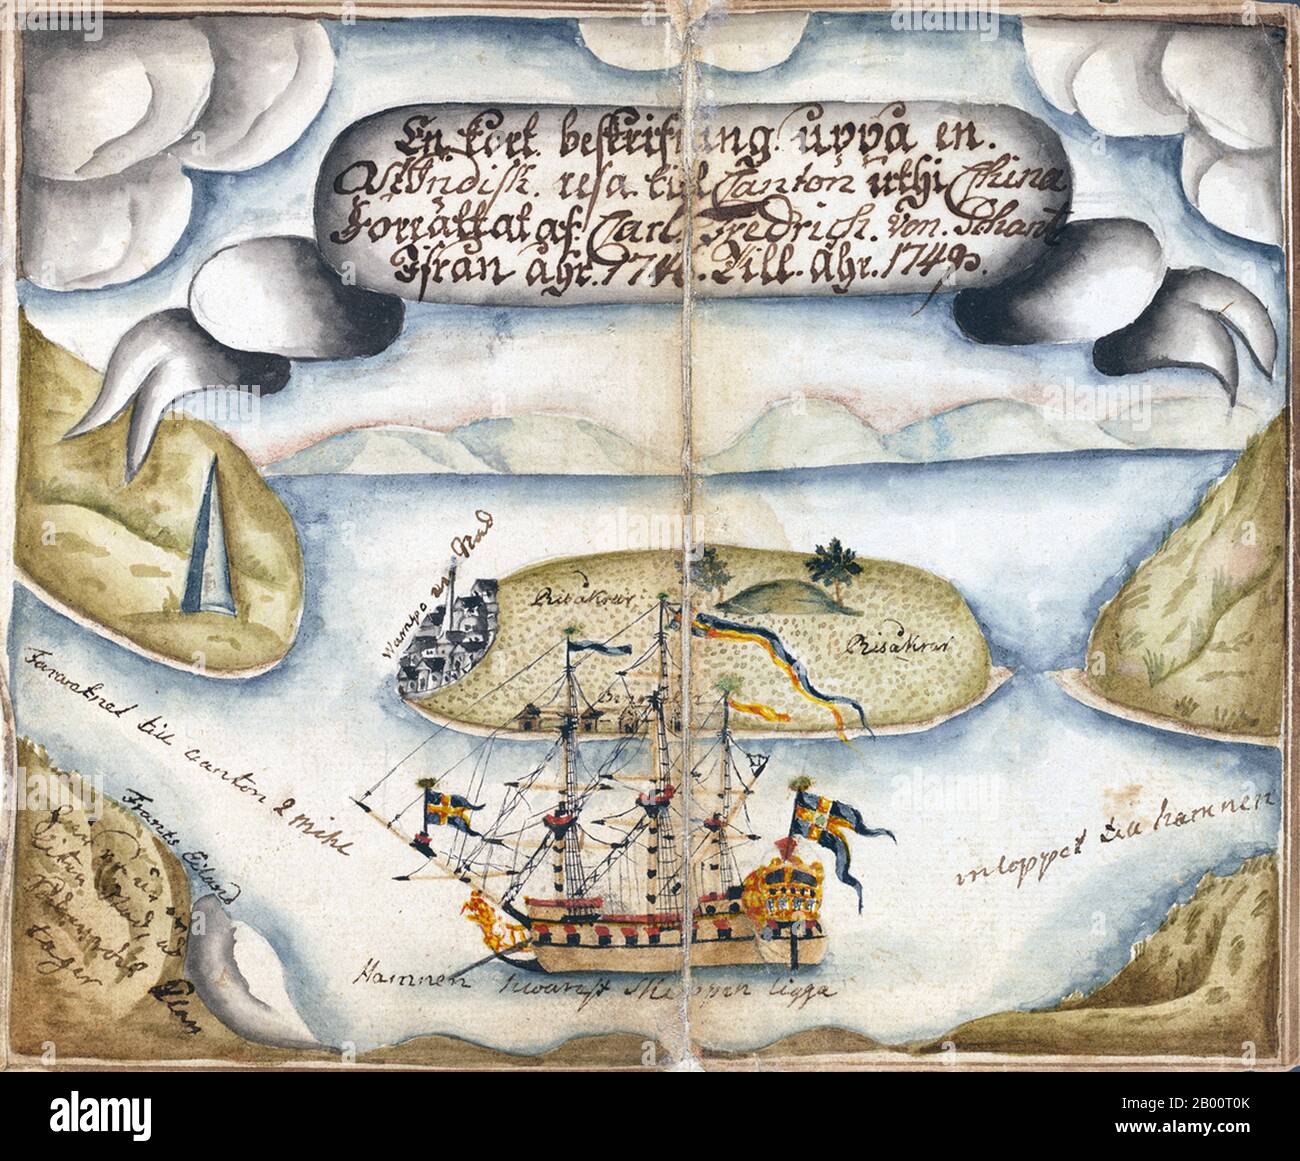 China/Sweden: Illuminated Swedish chart of Canton (Guangzhou) dated 1749.  From 1746 to 1749, the Swedish rigged brig Götha Lejon sailed on a mercantile mission to Canton. Several accounts of what transpired have survived. This handwritten journal has been attributed to Carl Fredrik von Schantz (1727-92). Another account of the mission of Götha Lejon was compiled by Carl Johan Gethe (1728-65). Stock Photo